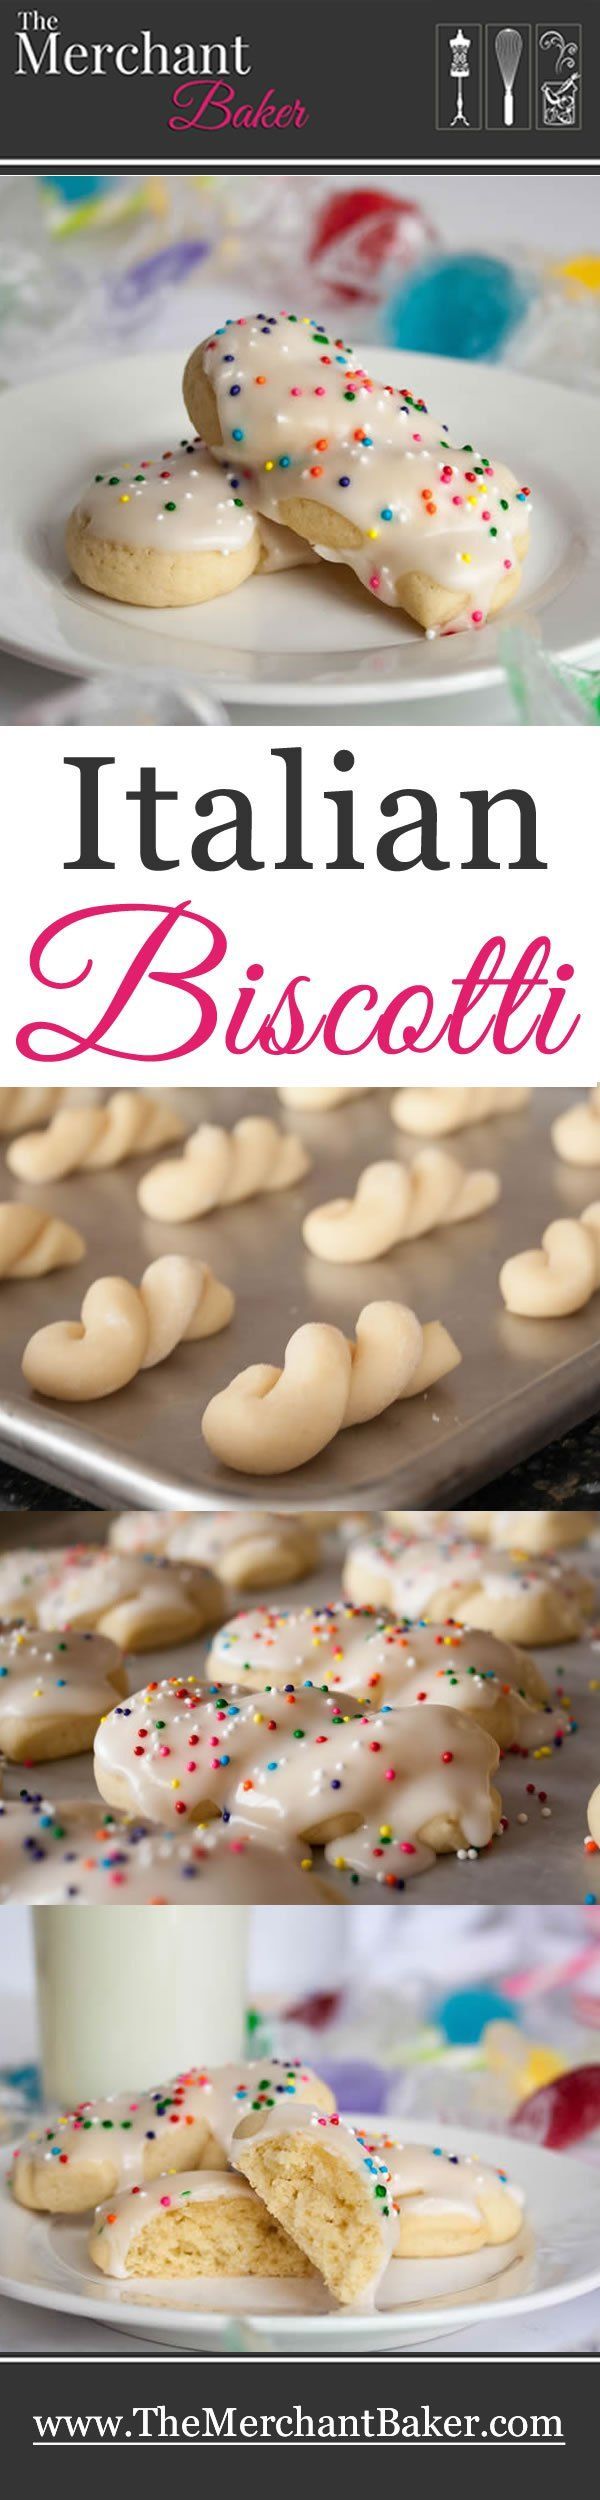 Italian Biscotti. The very best recipe for this traditionally soft and tender iced